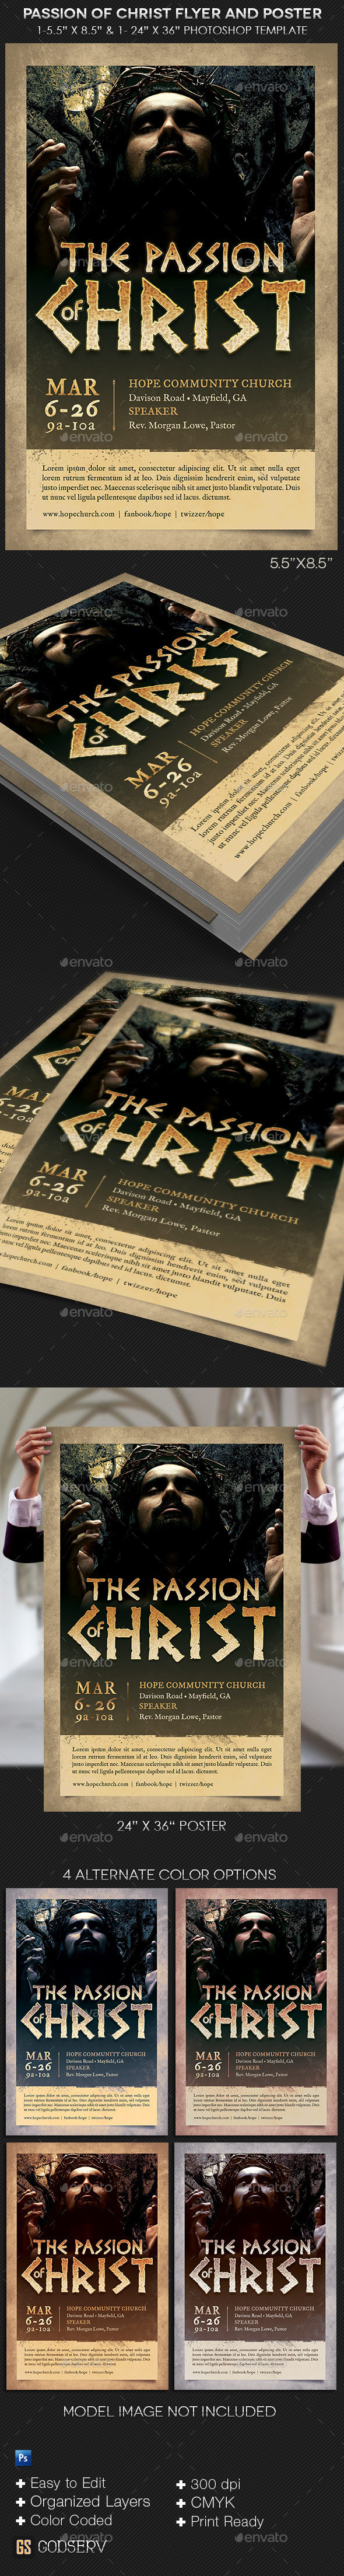 Passion of christ flyer and poster template preview